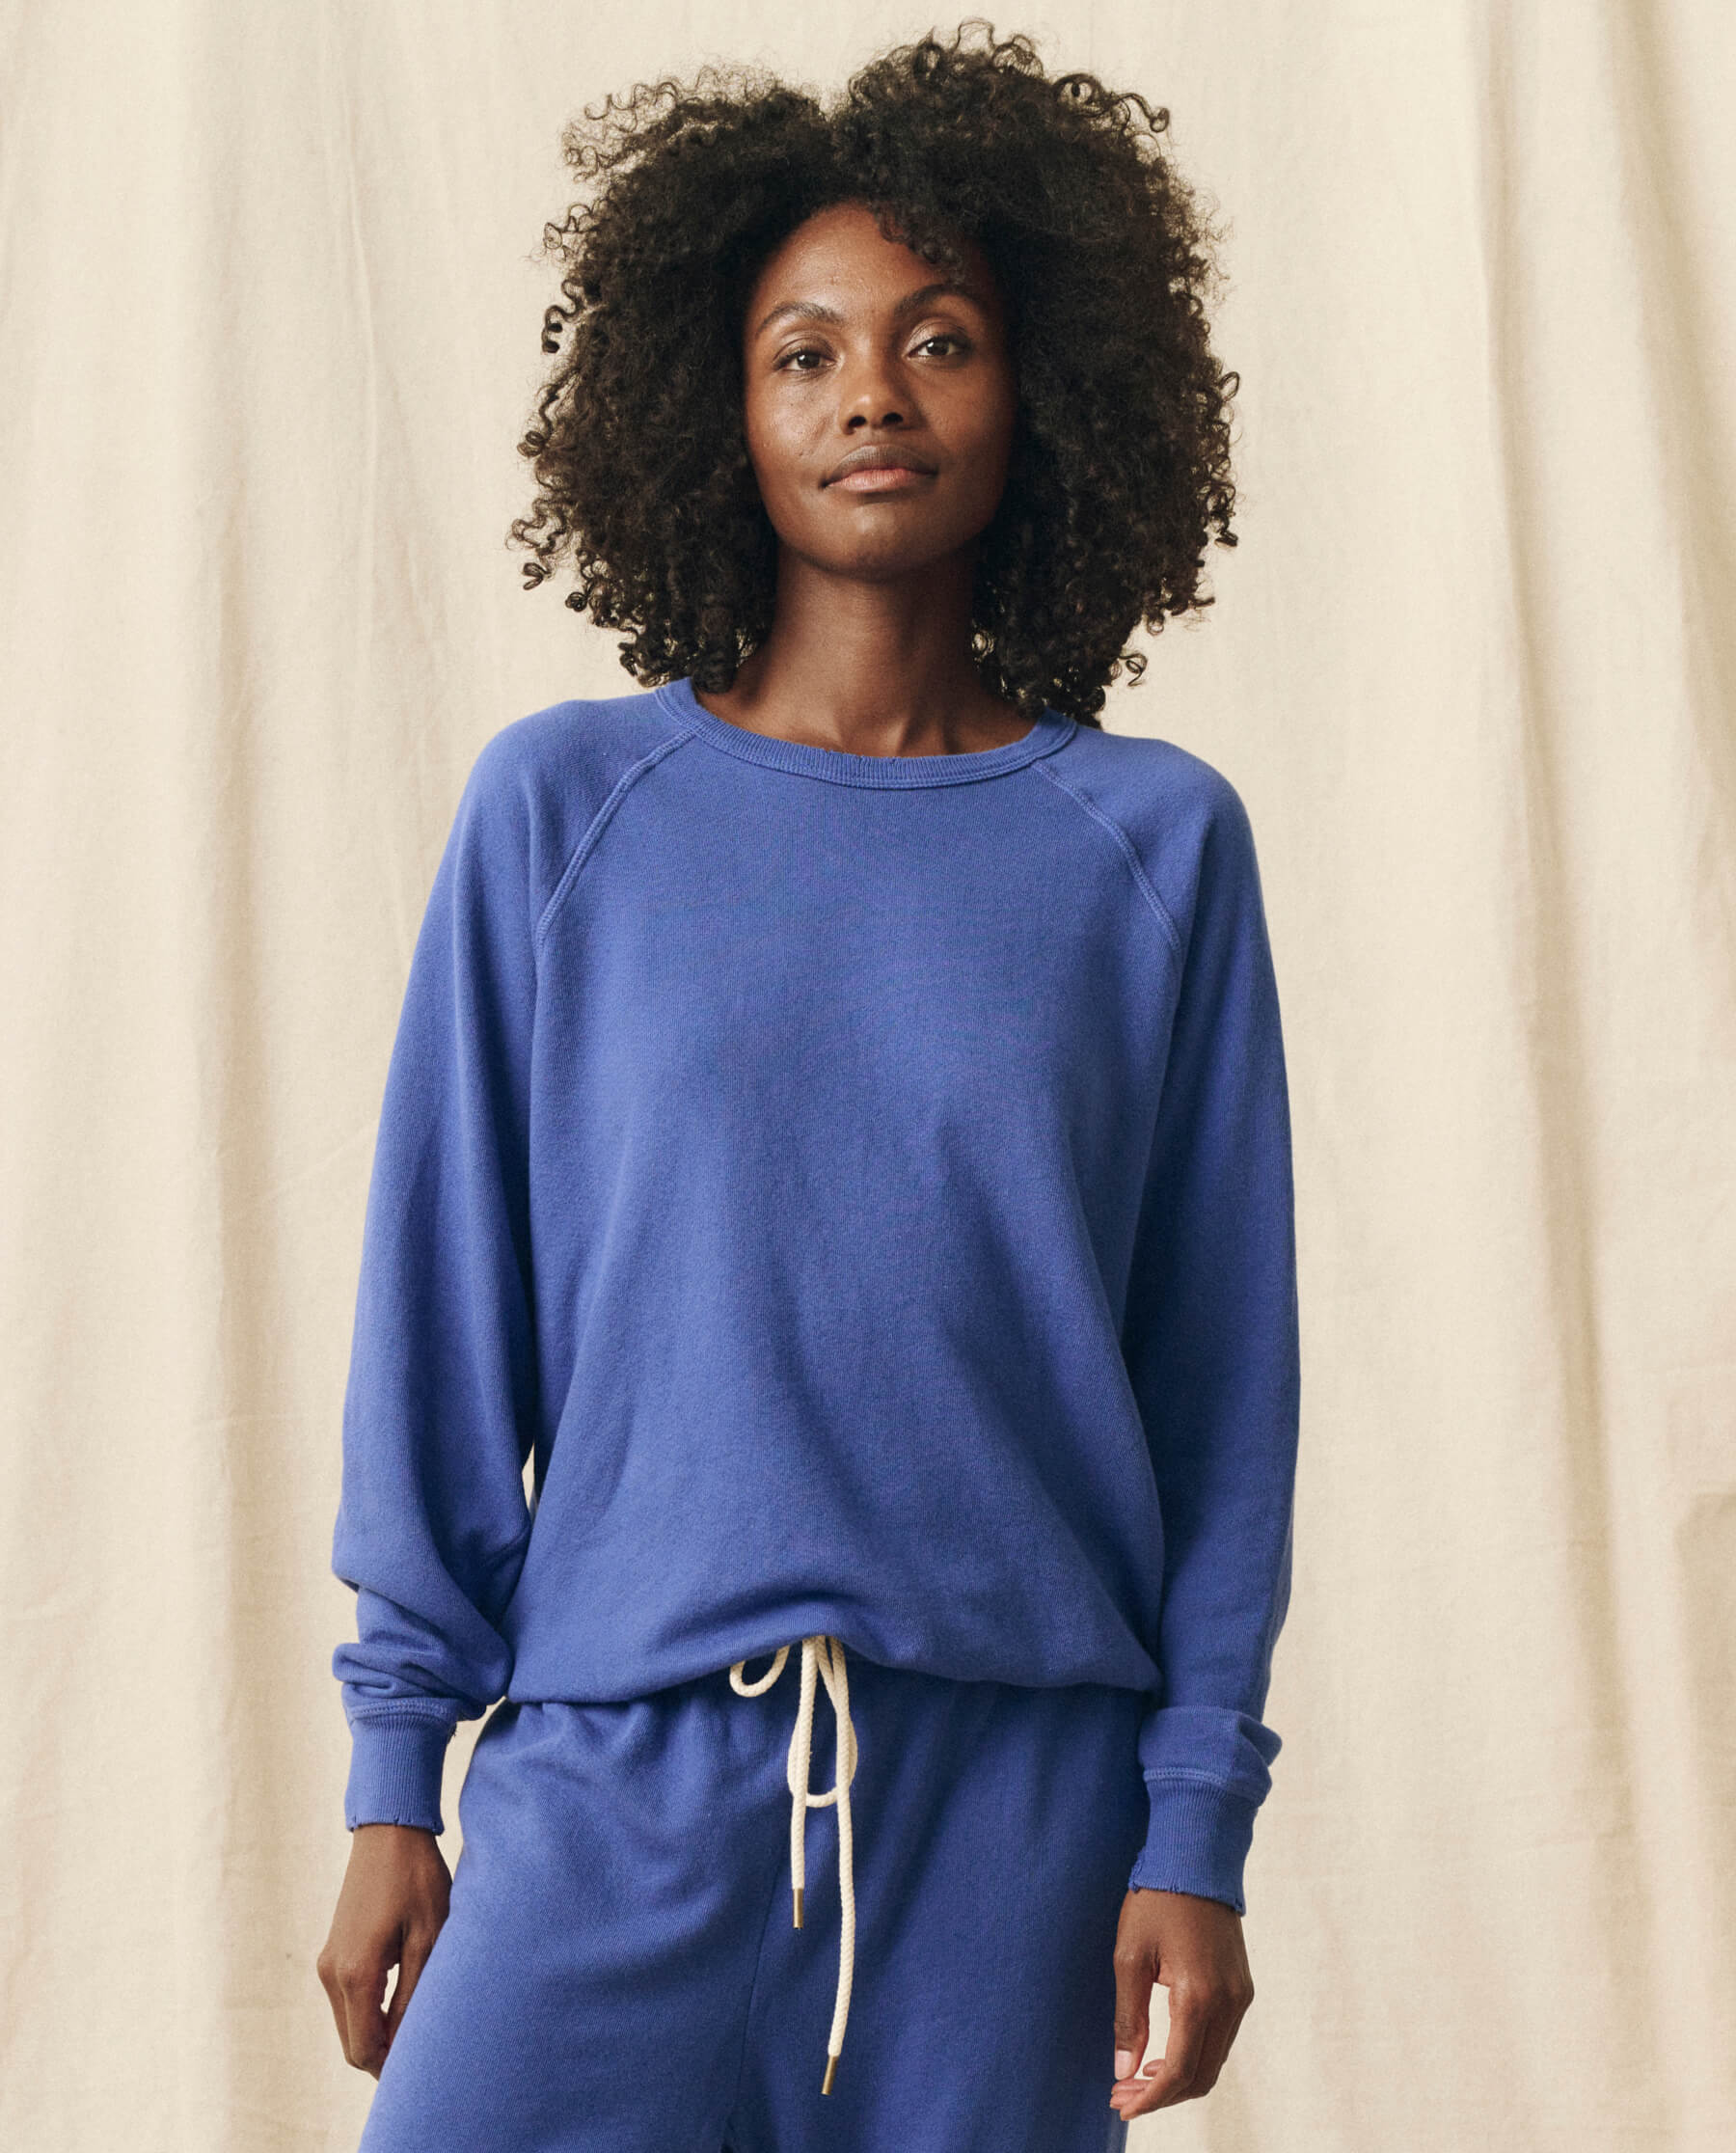 The College Sweatshirt. Solid -- Cambridge Blue SWEATSHIRTS THE GREAT. PS24 KNITS D1